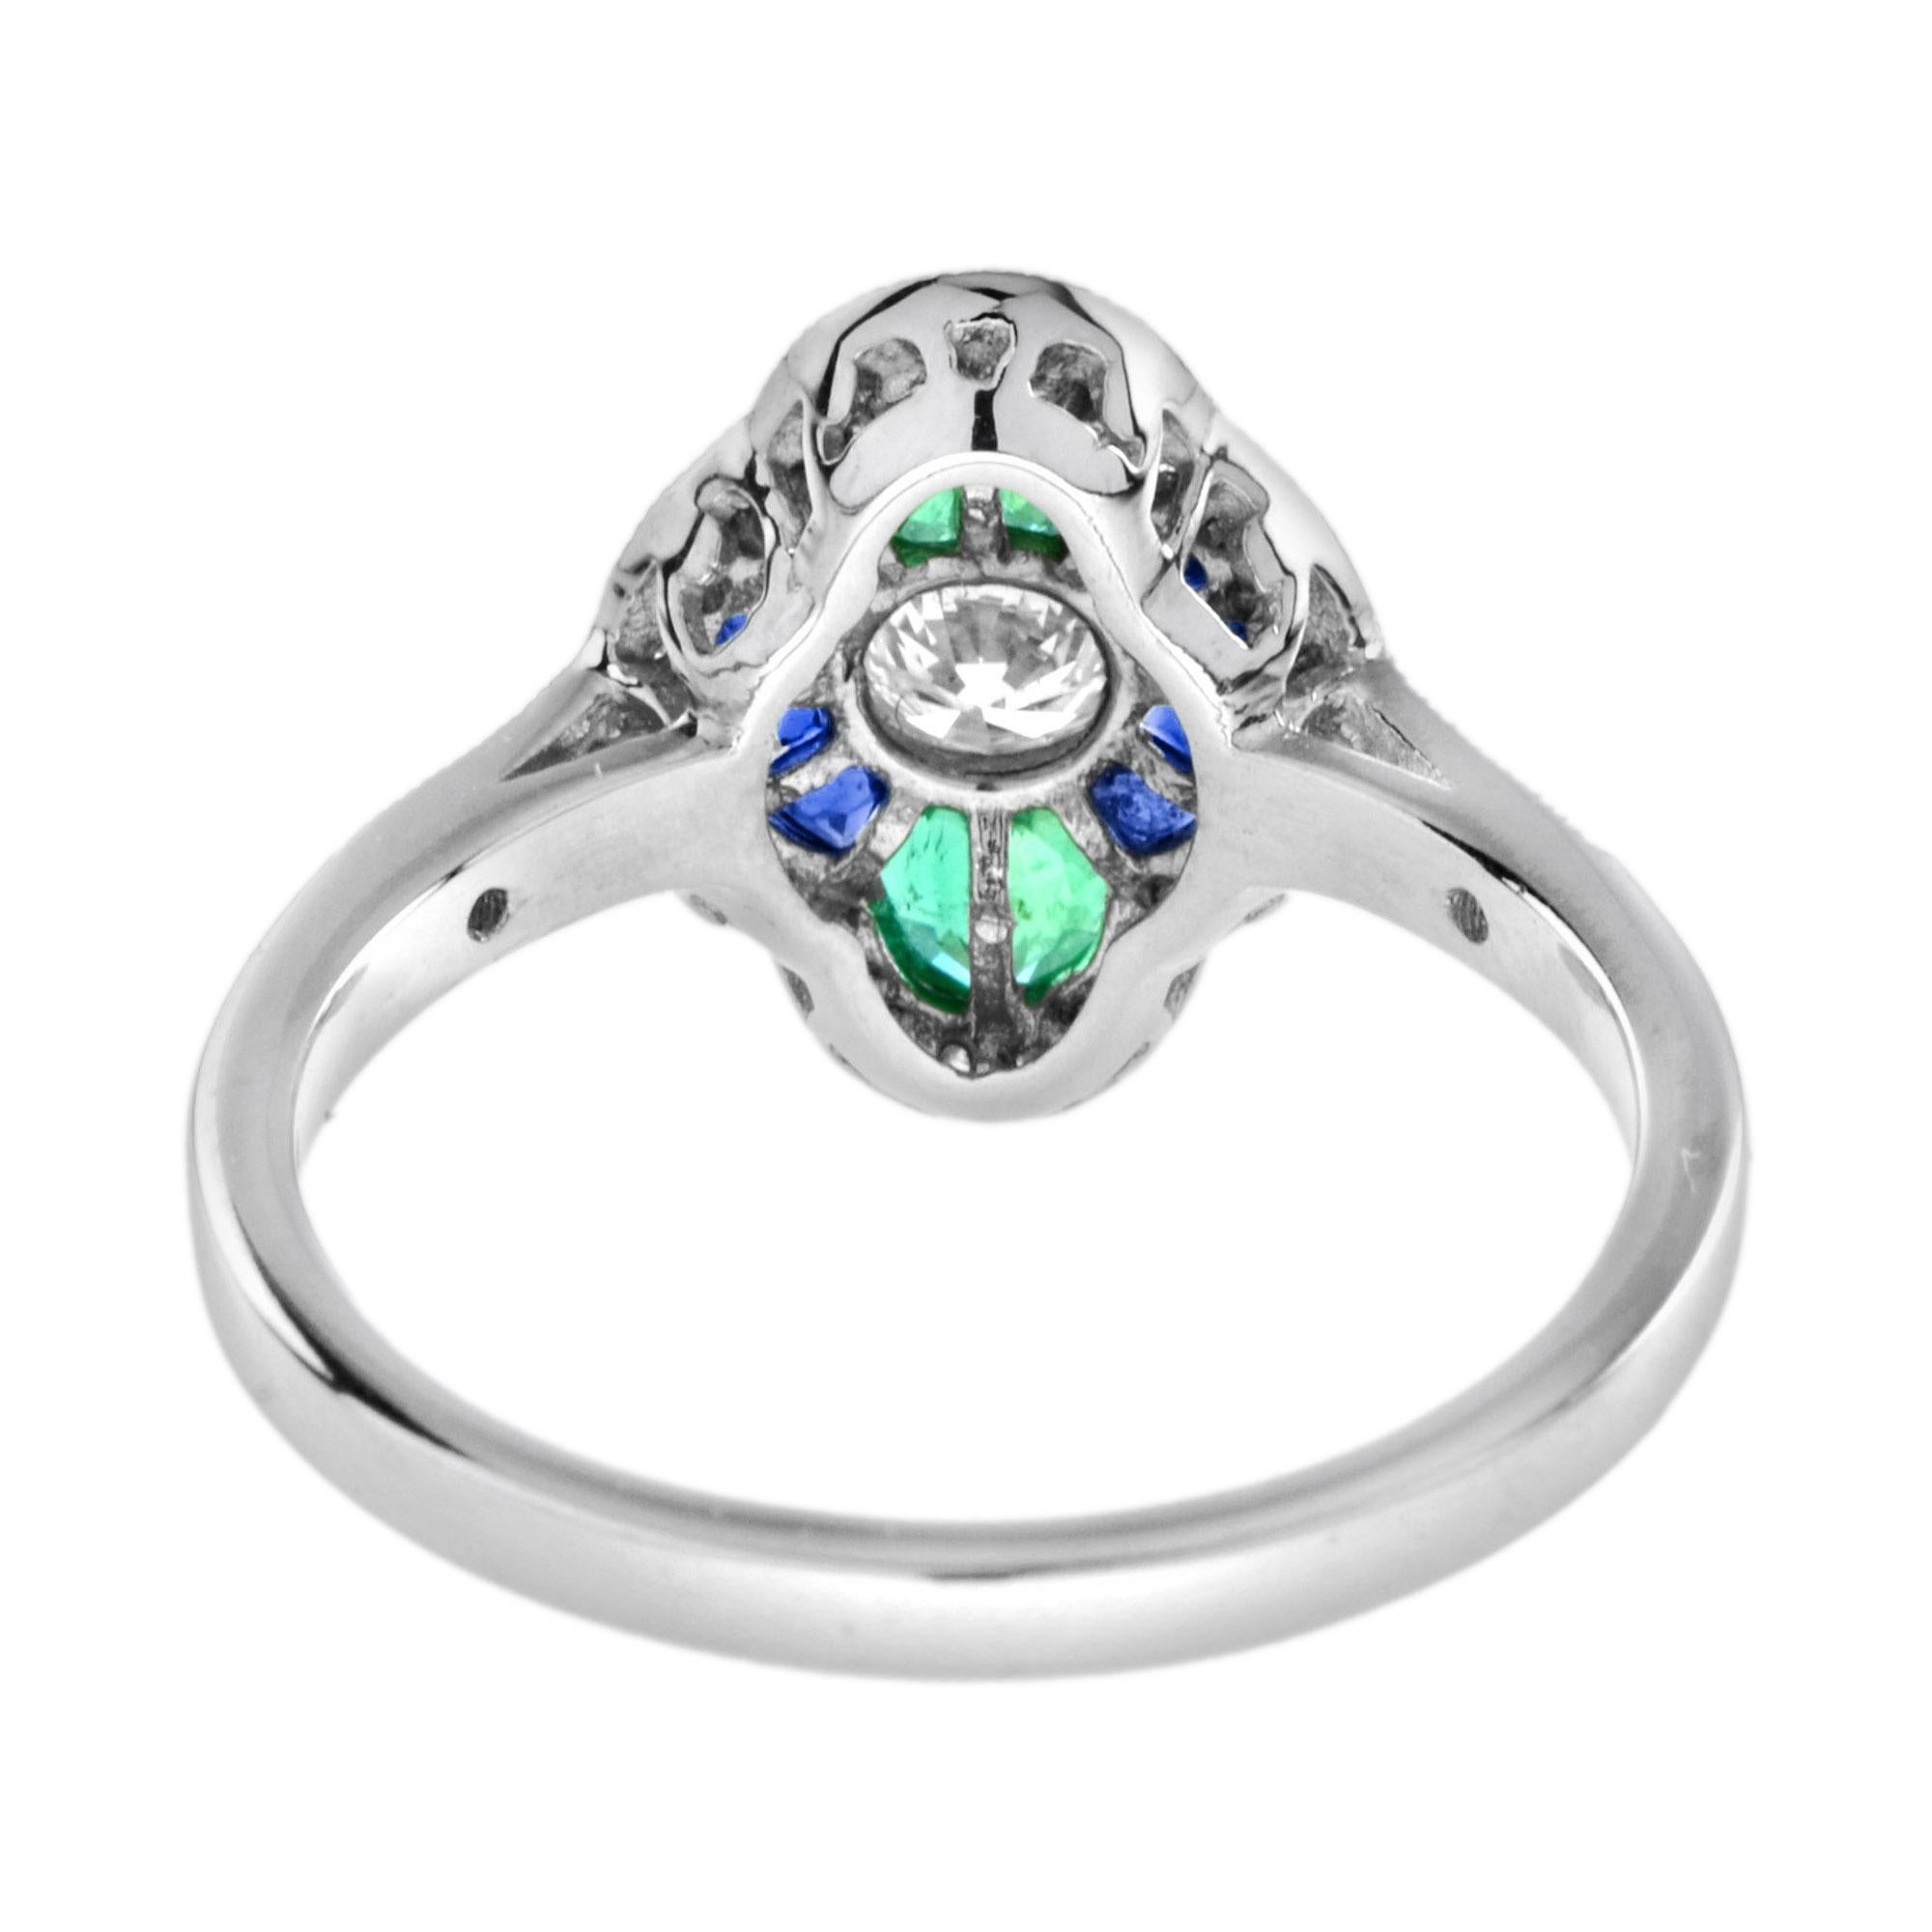 For Sale:  Diamond Sapphire Emerald Art Deco Style Engagement Ring in 18k White Gold 5